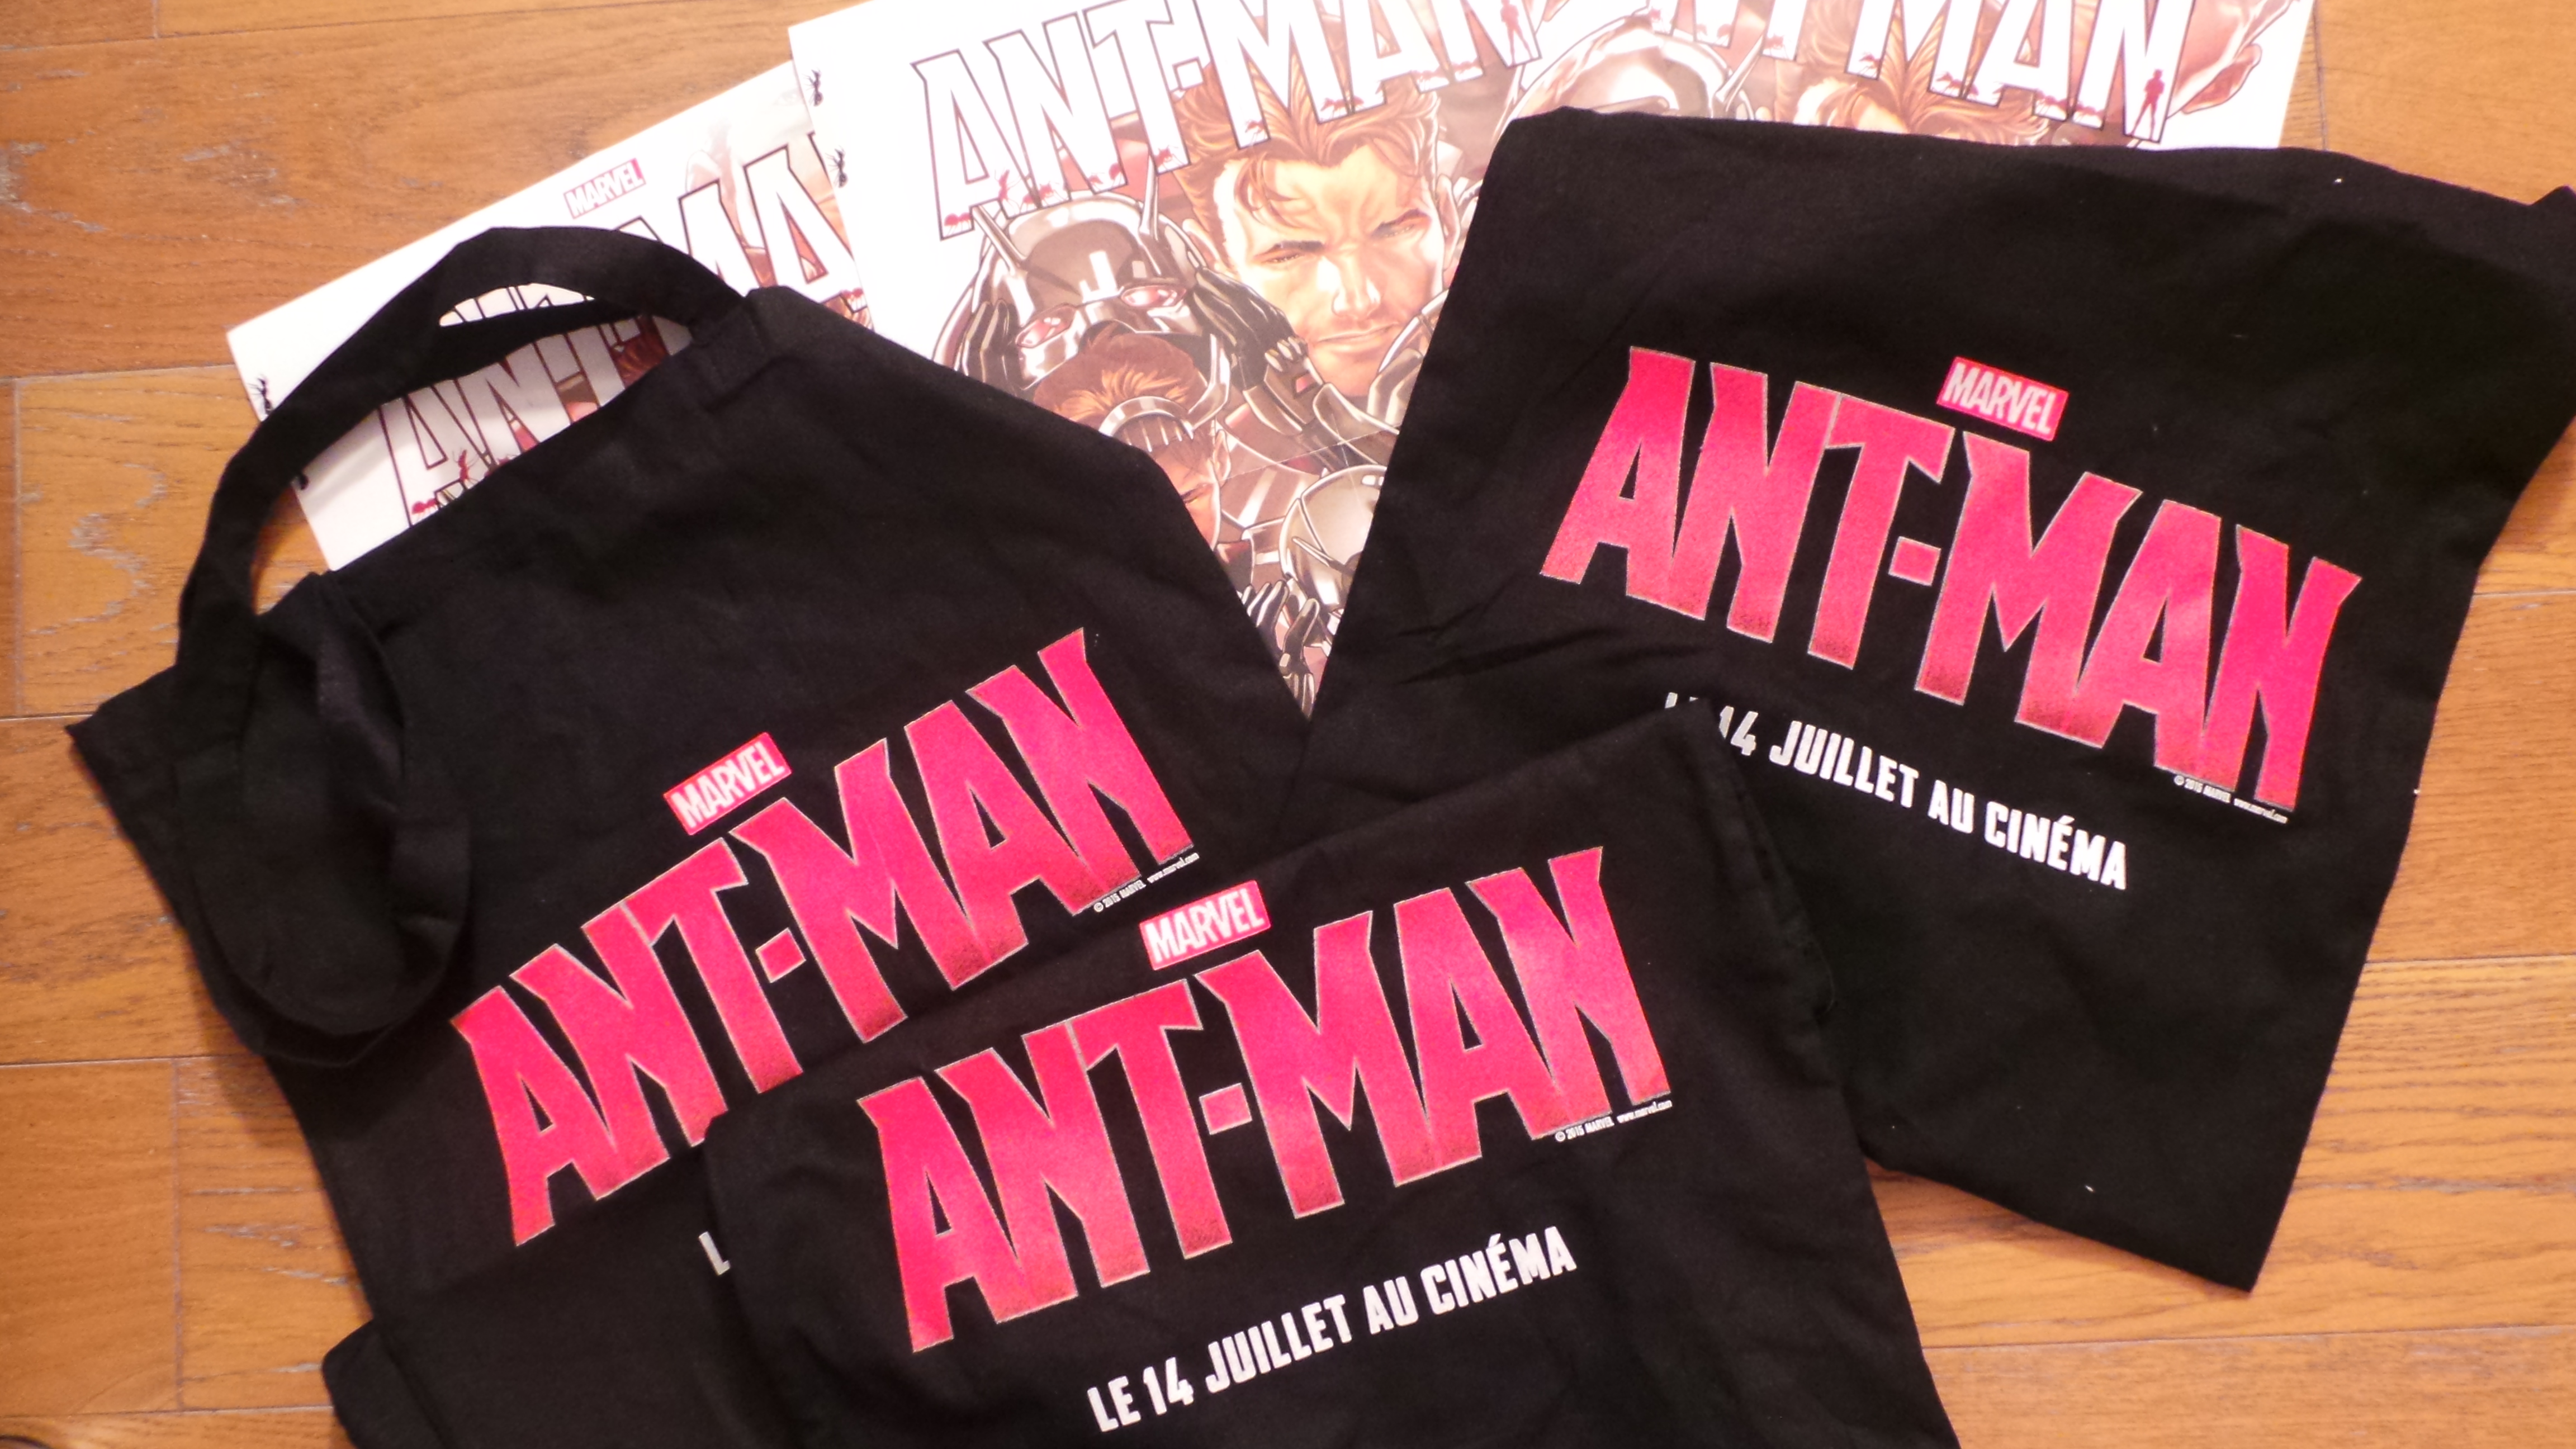 ANT-MAN - Visuel Concours tote bag affiches à gagner 3 - copyright Go with the Blog